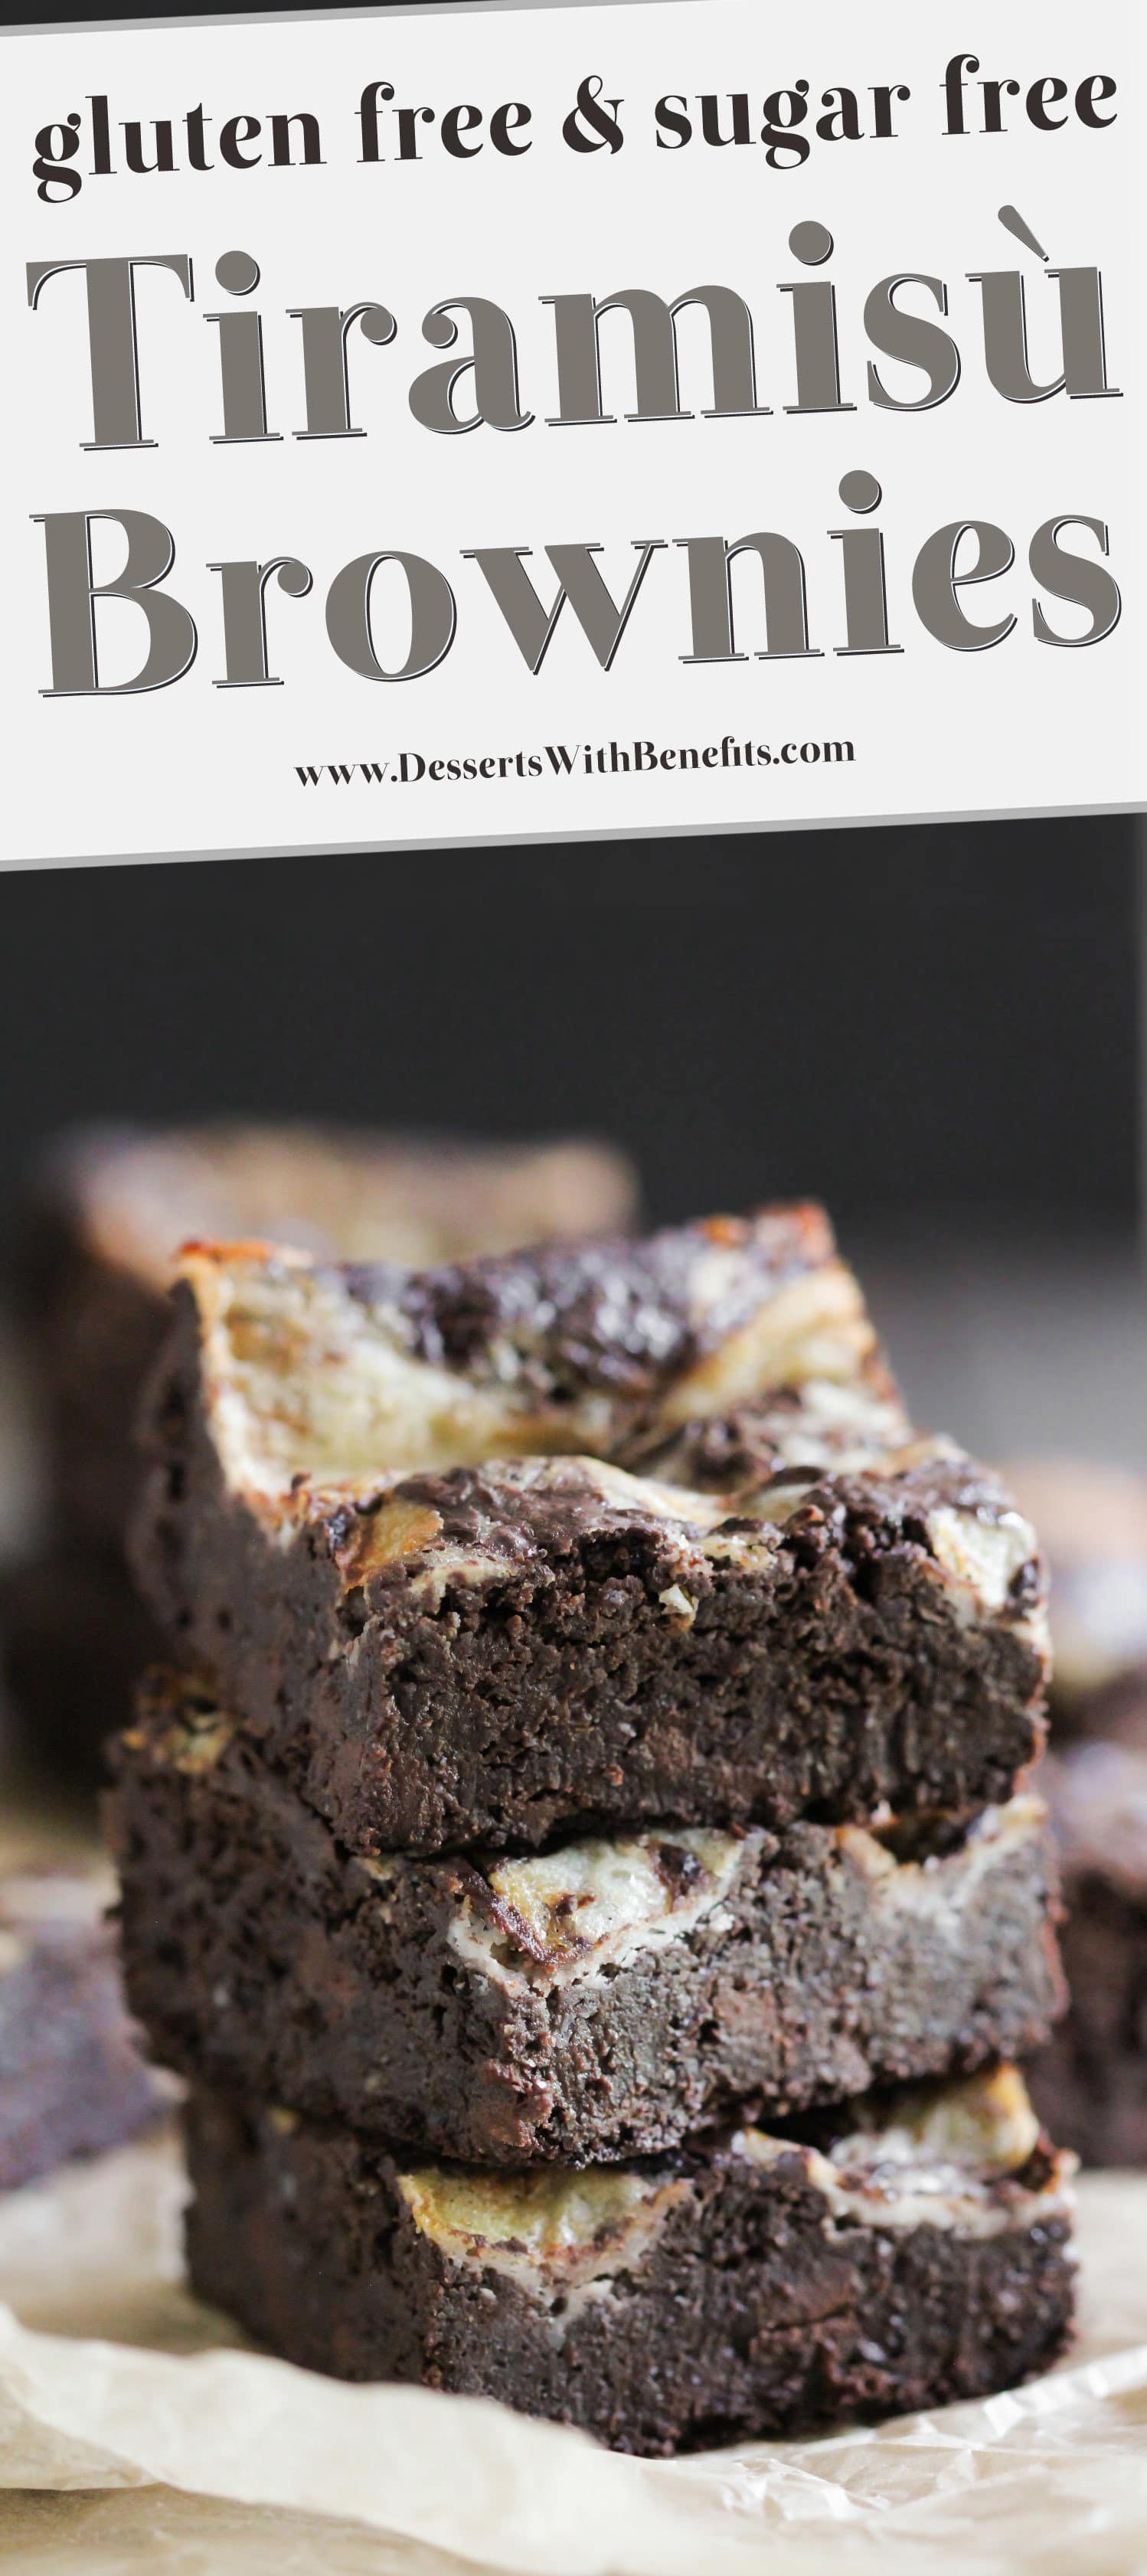 These Healthy Tiramisu Brownies are utterly LIFE-CHANGING. They’re decadent, uber fudgy, and topped with a rich mascarpone swirl. These brownies have got the important Tiramisu components: coffee, mascarpone, rum. One bite and you’d never believe these are sugar free, high fiber, high protein, and gluten free too! Healthy Dessert Recipes at the Desserts With Benefits Blog (www.DessertsWithBenefits.com)